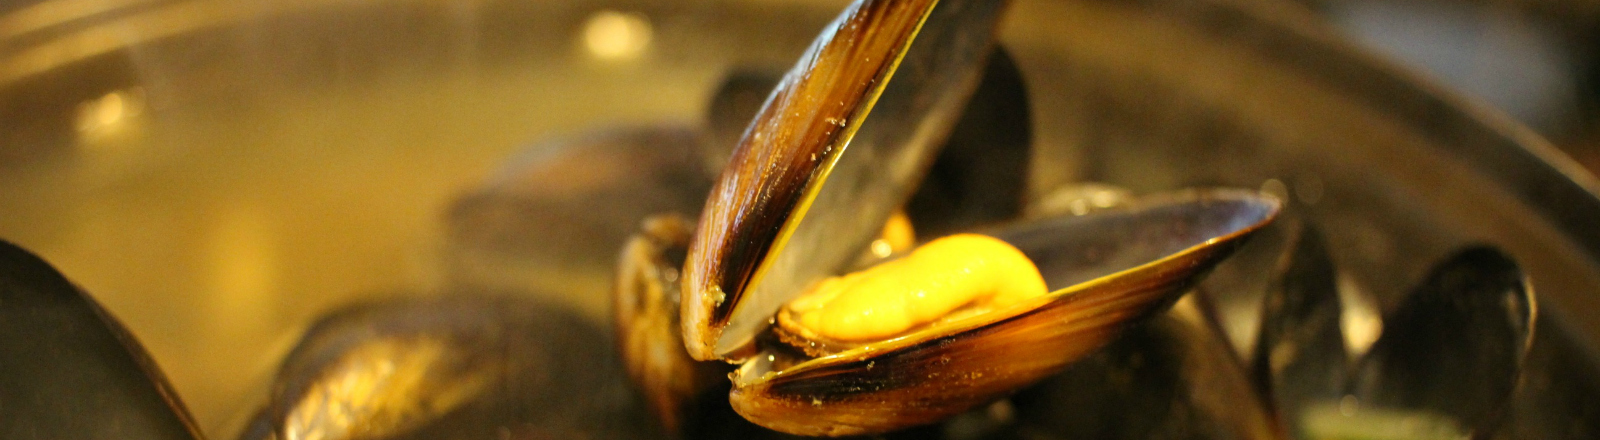 Mussels 3